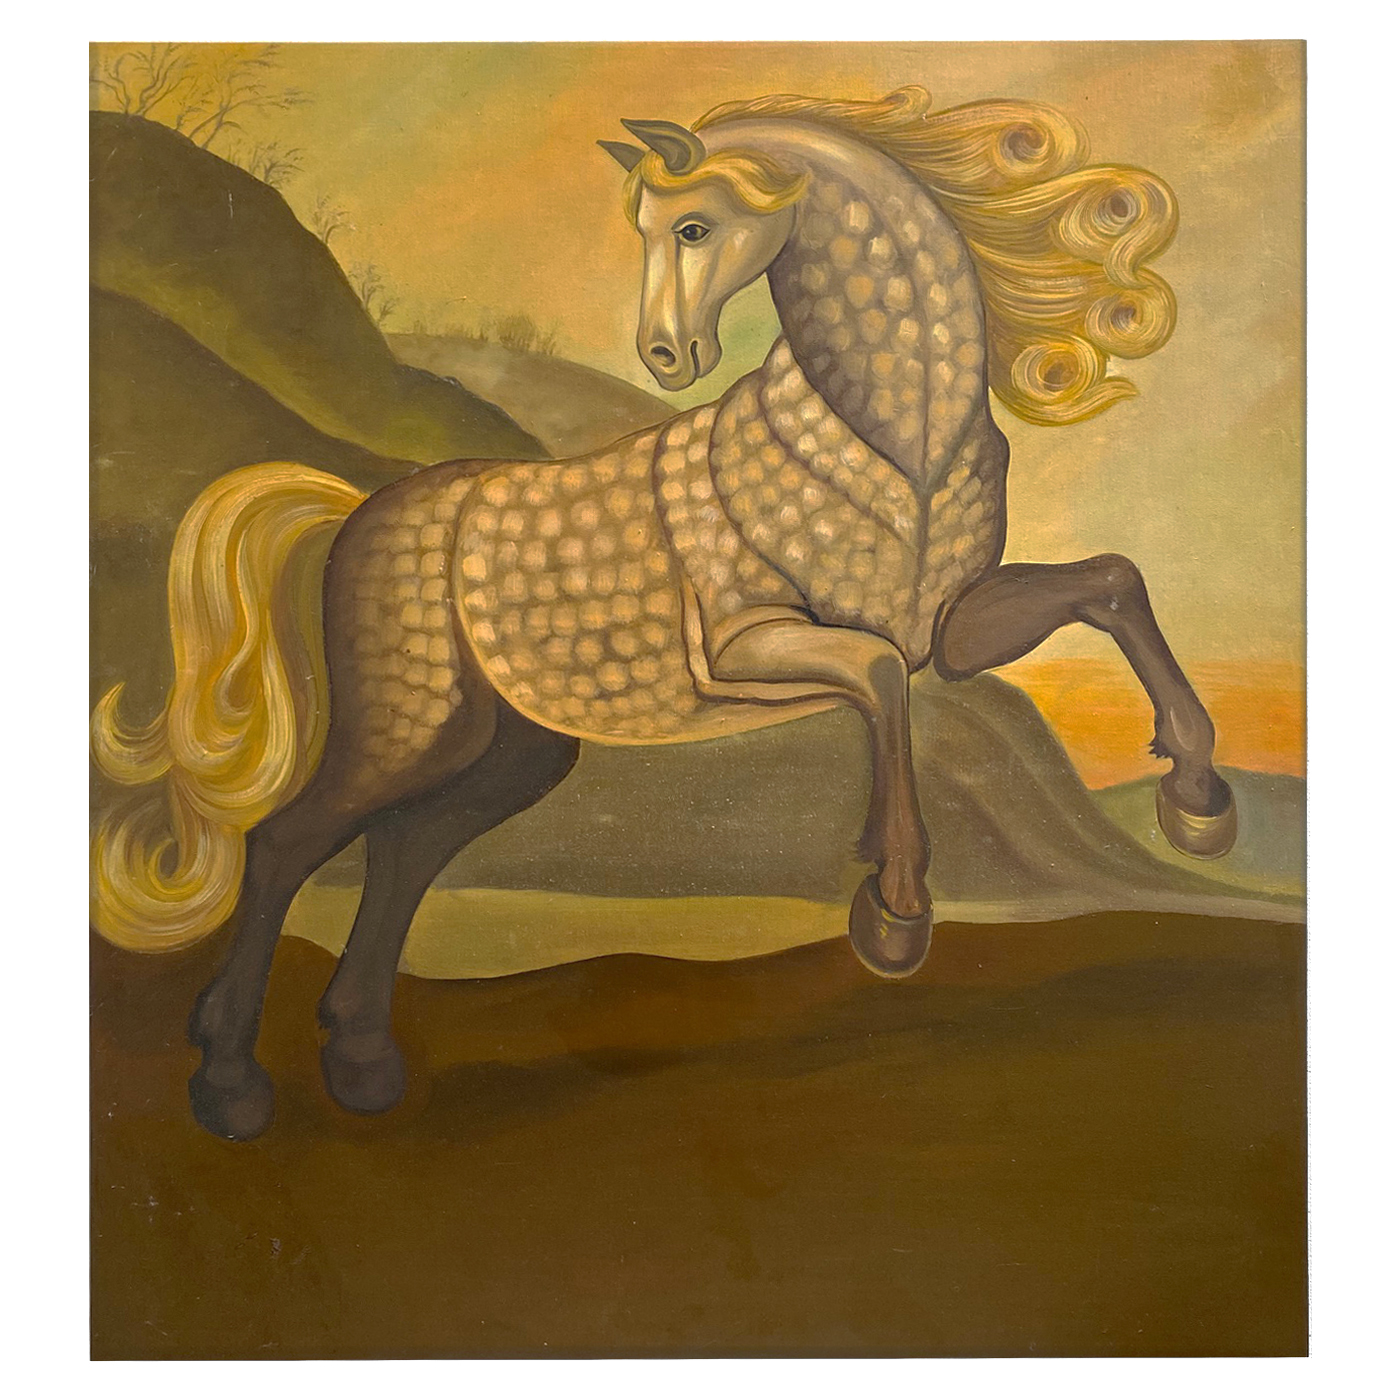 Motion　Contemporary　Indian　Painting　Art　Horse　Indian　in　Art